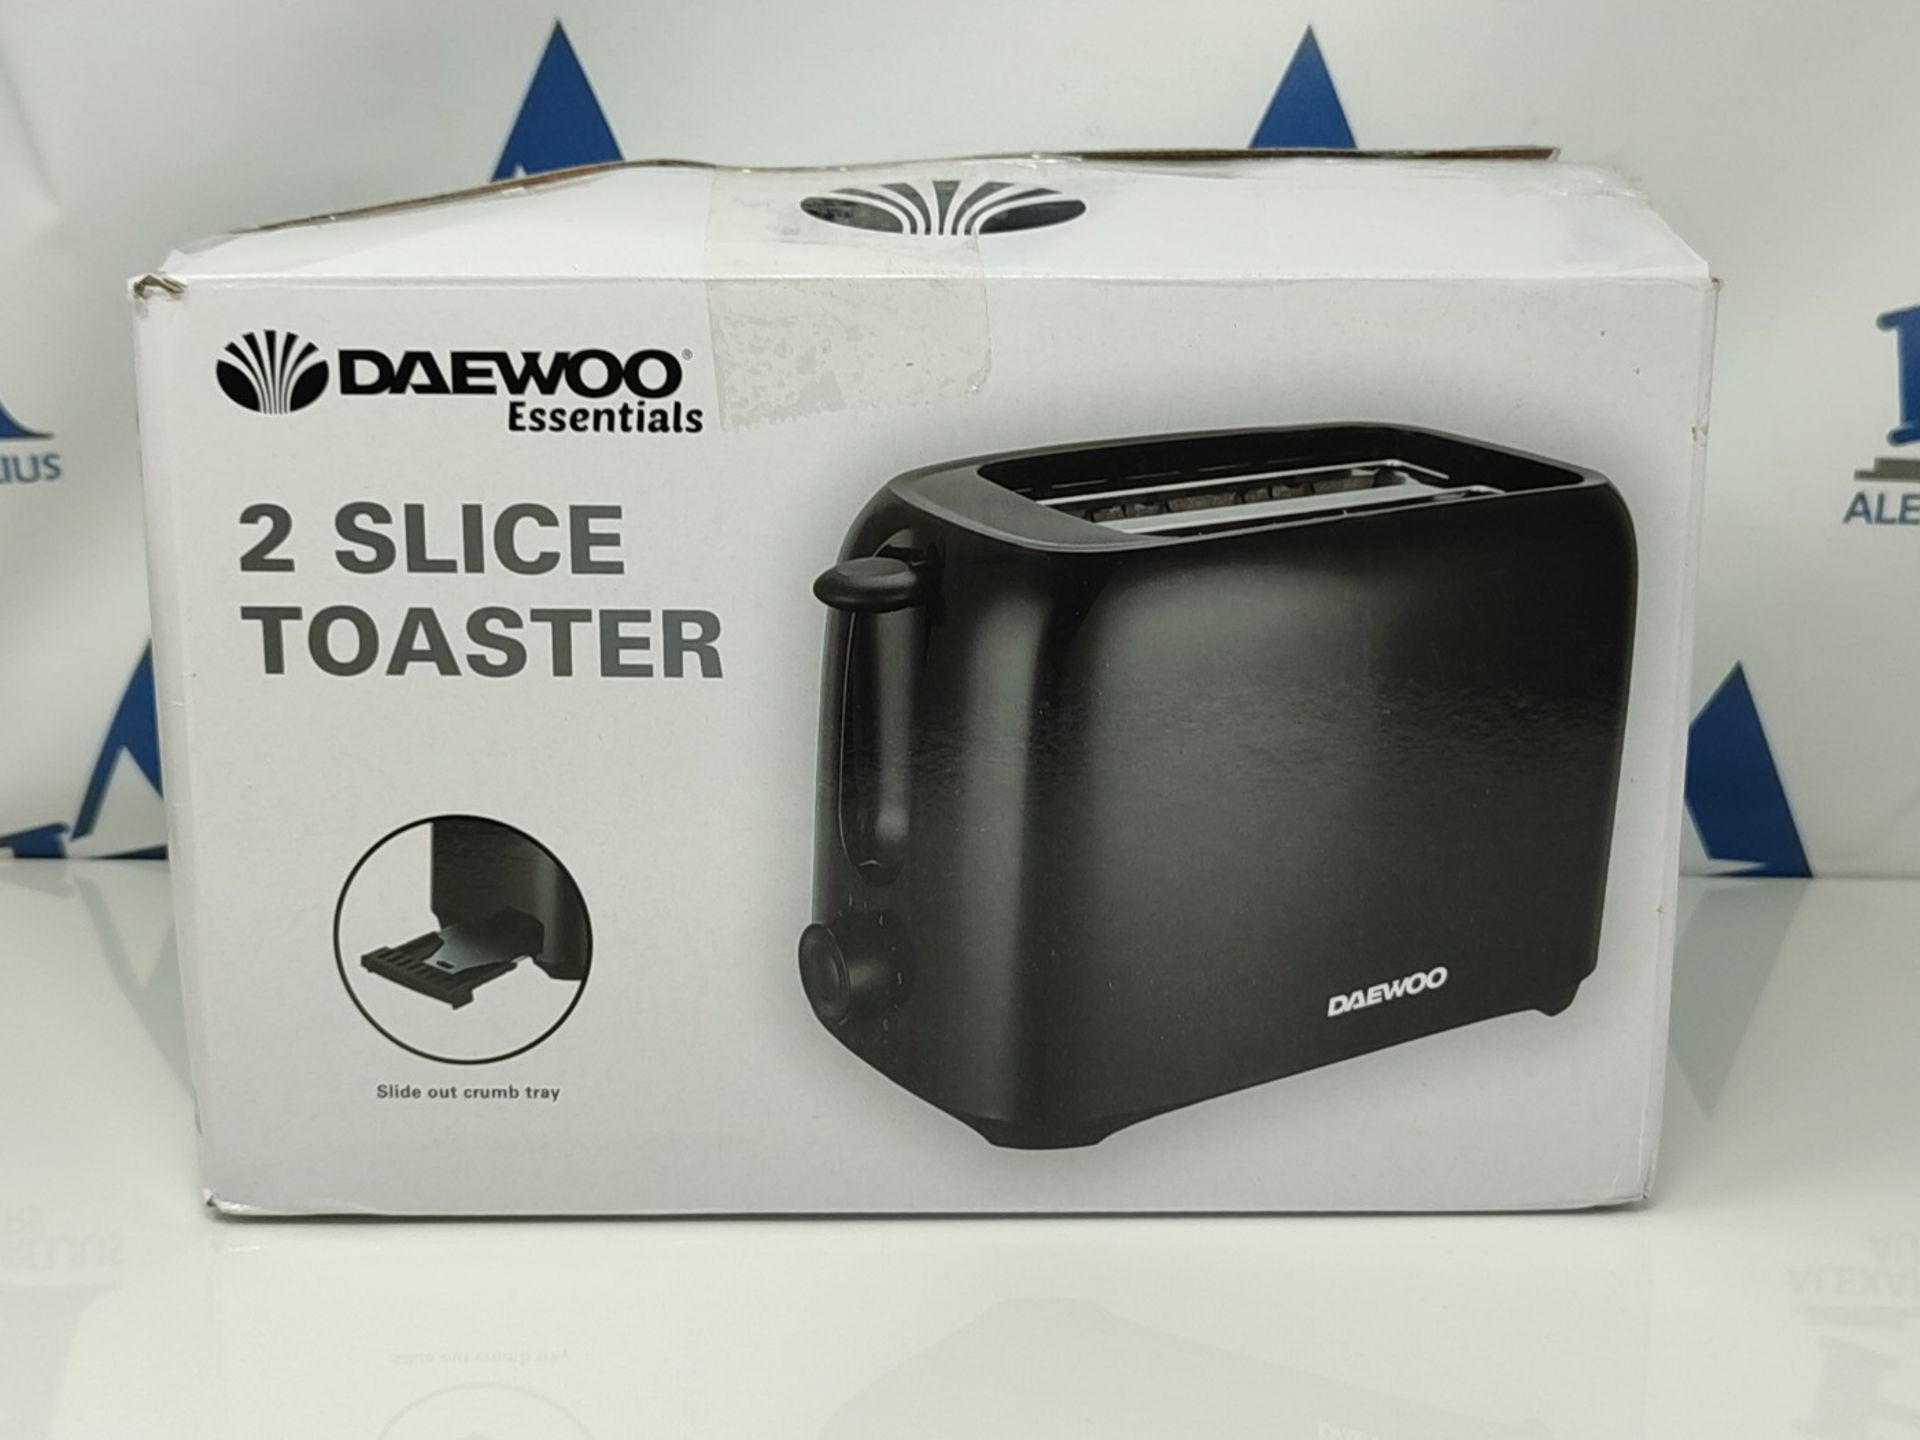 Daewoo Essentials, Plastic 2 Slice Toaster, Black, Variable Browning Controls, Cancel - Image 2 of 3